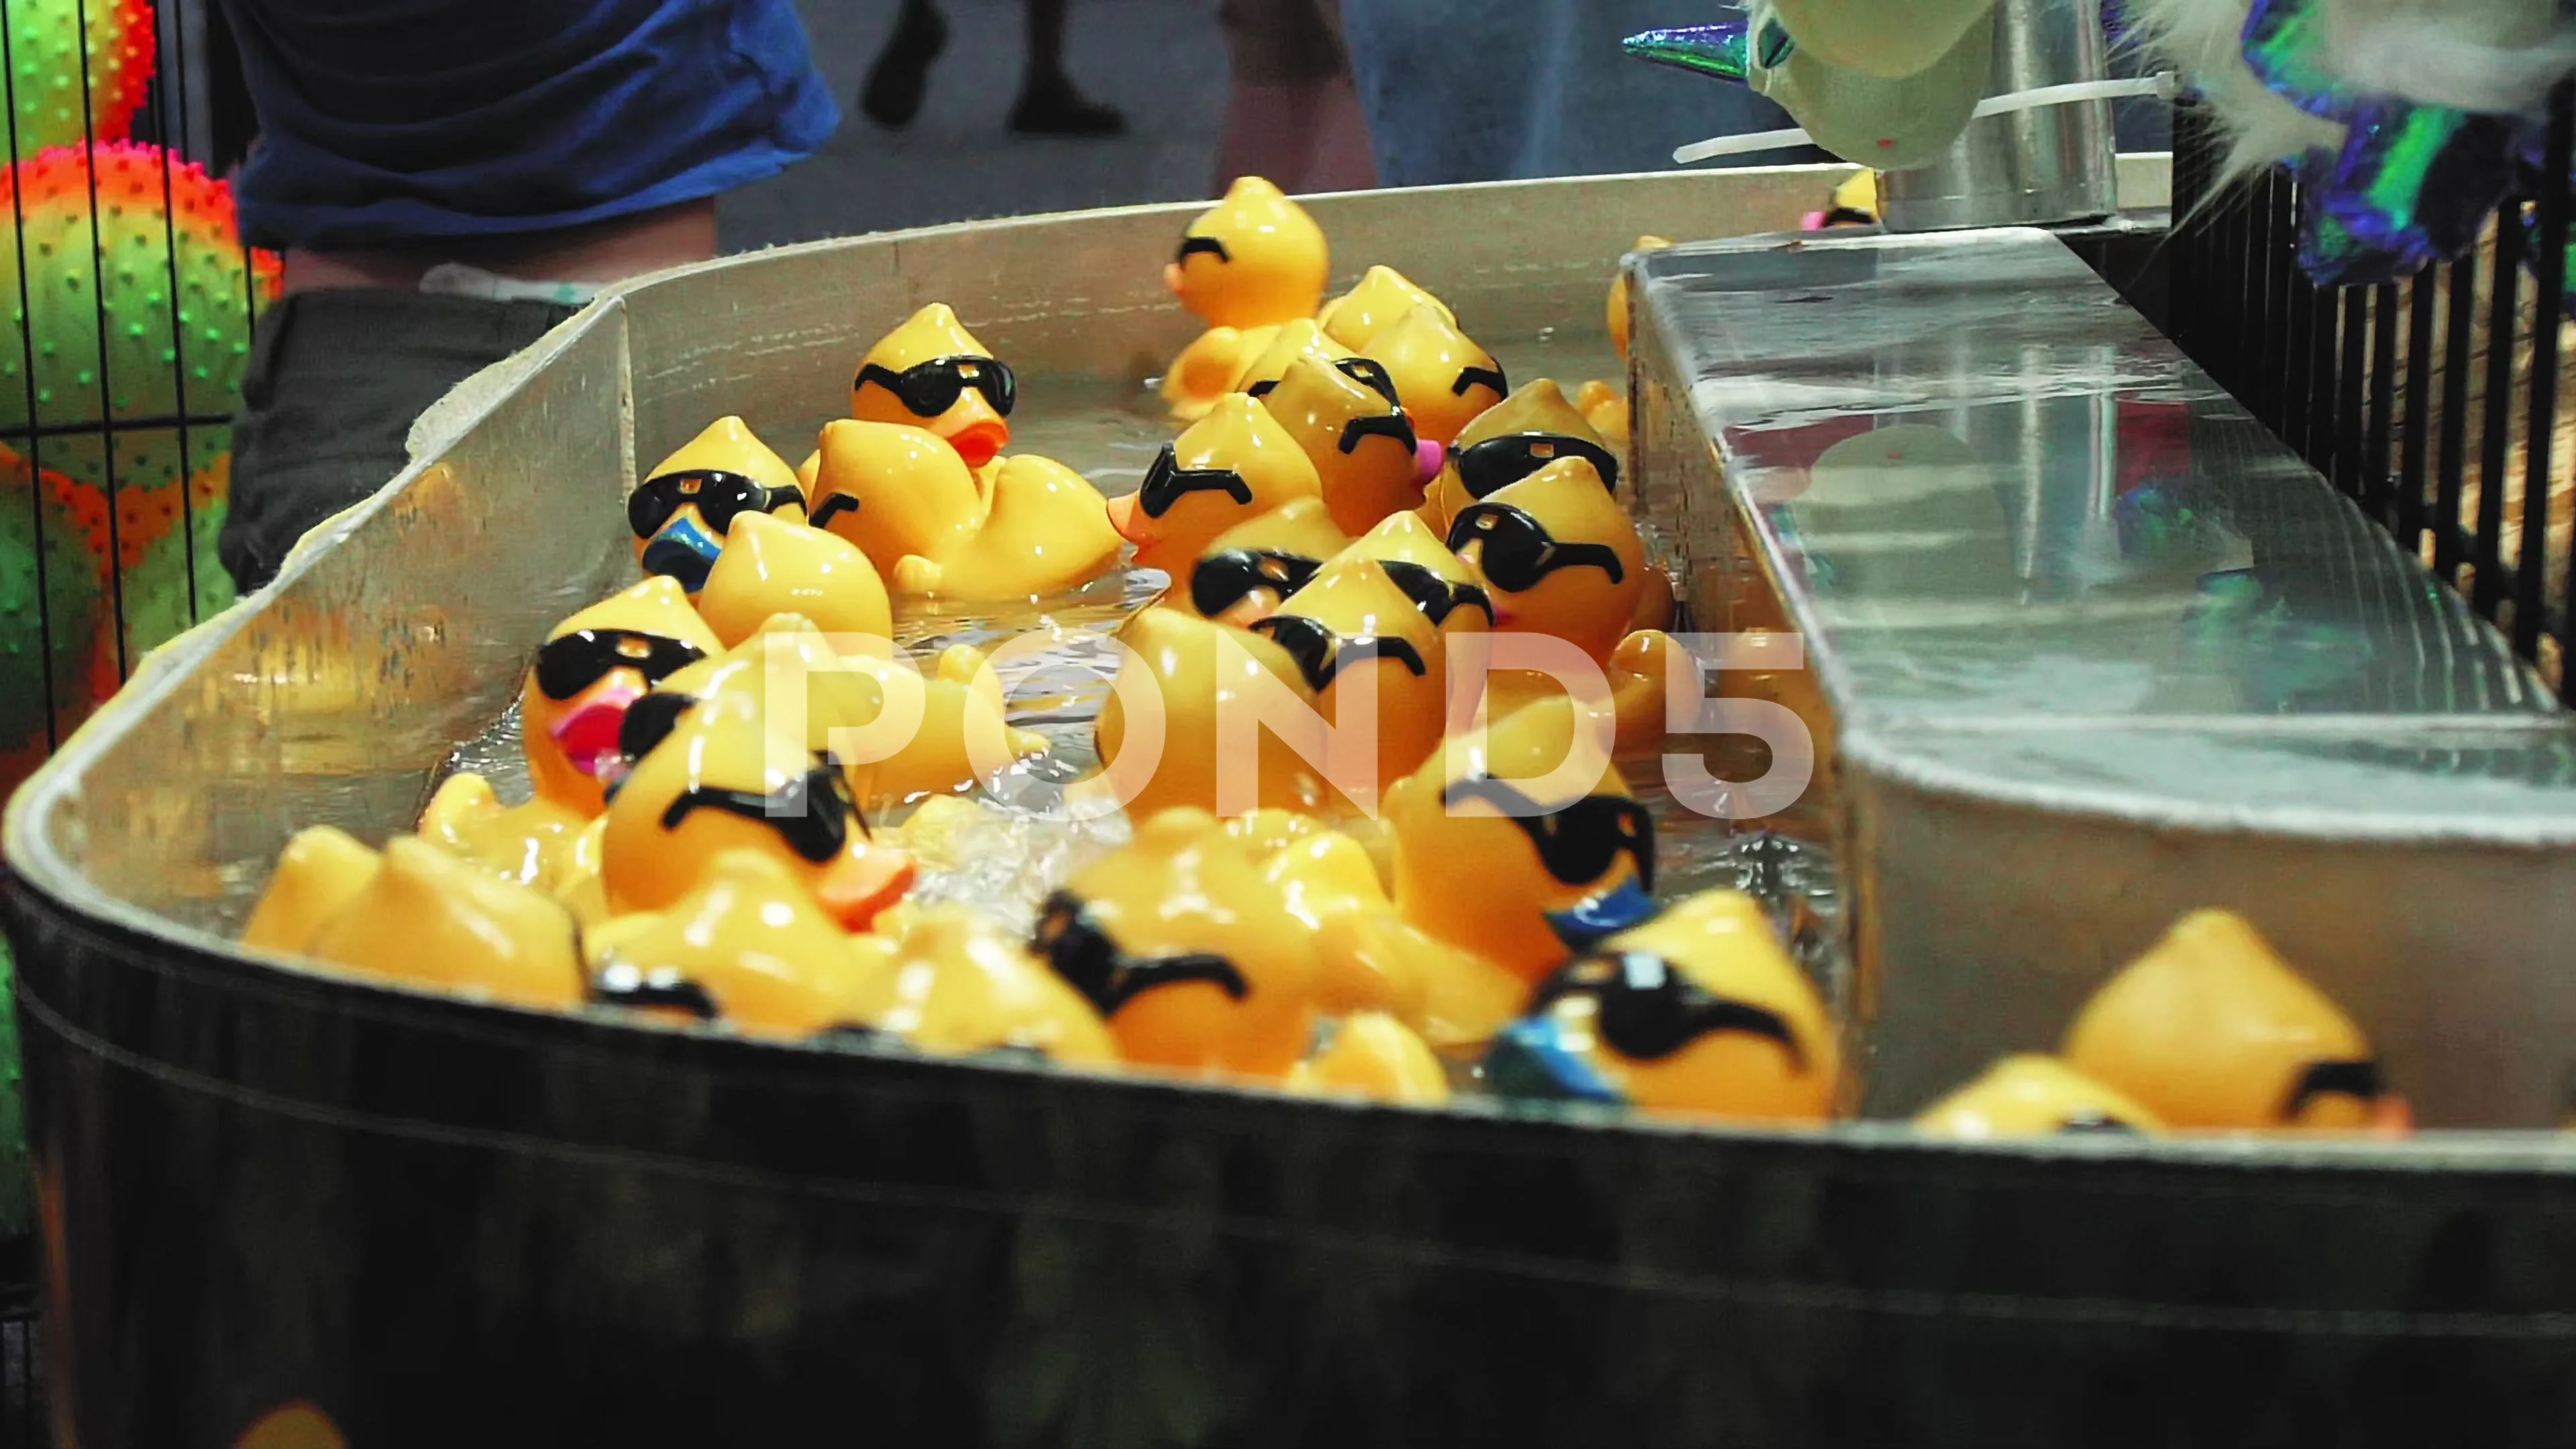 Close Up Rubber Duck Carnival Game Count, Stock Video